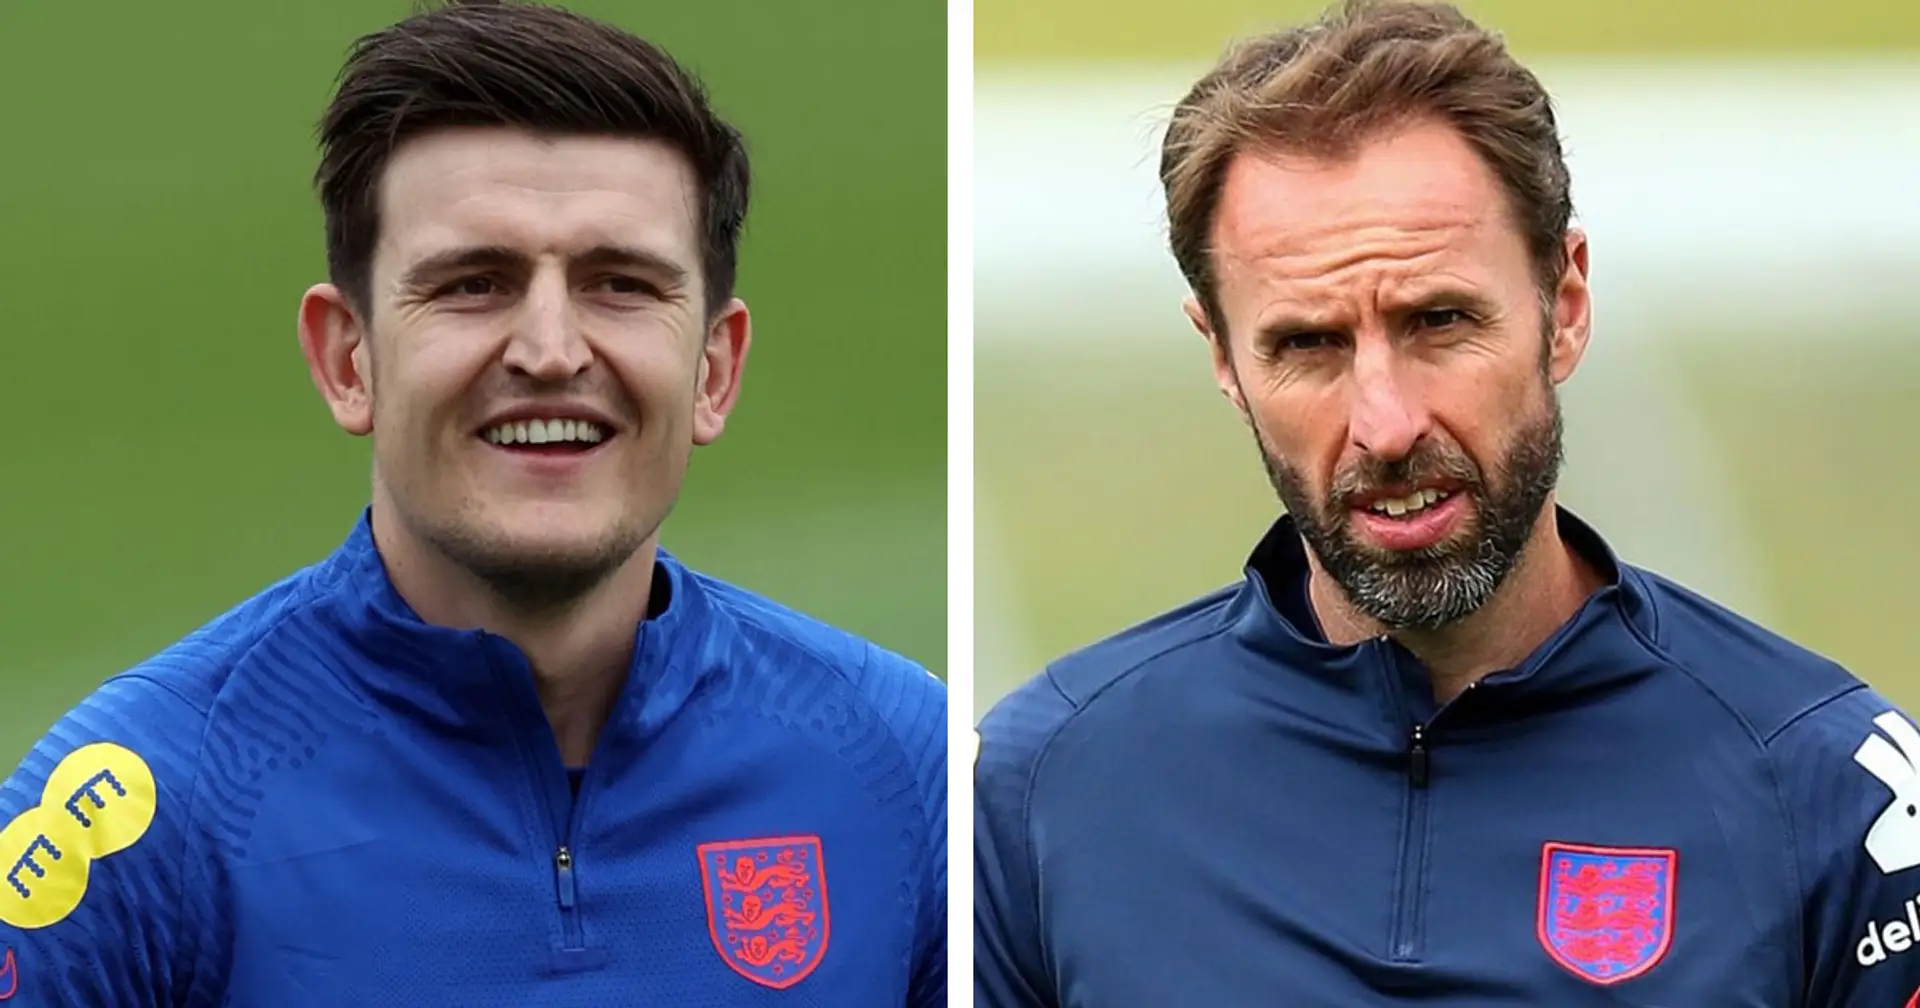 'I'm back available and looking forward to it': Maguire declares himself available for Scotland clash